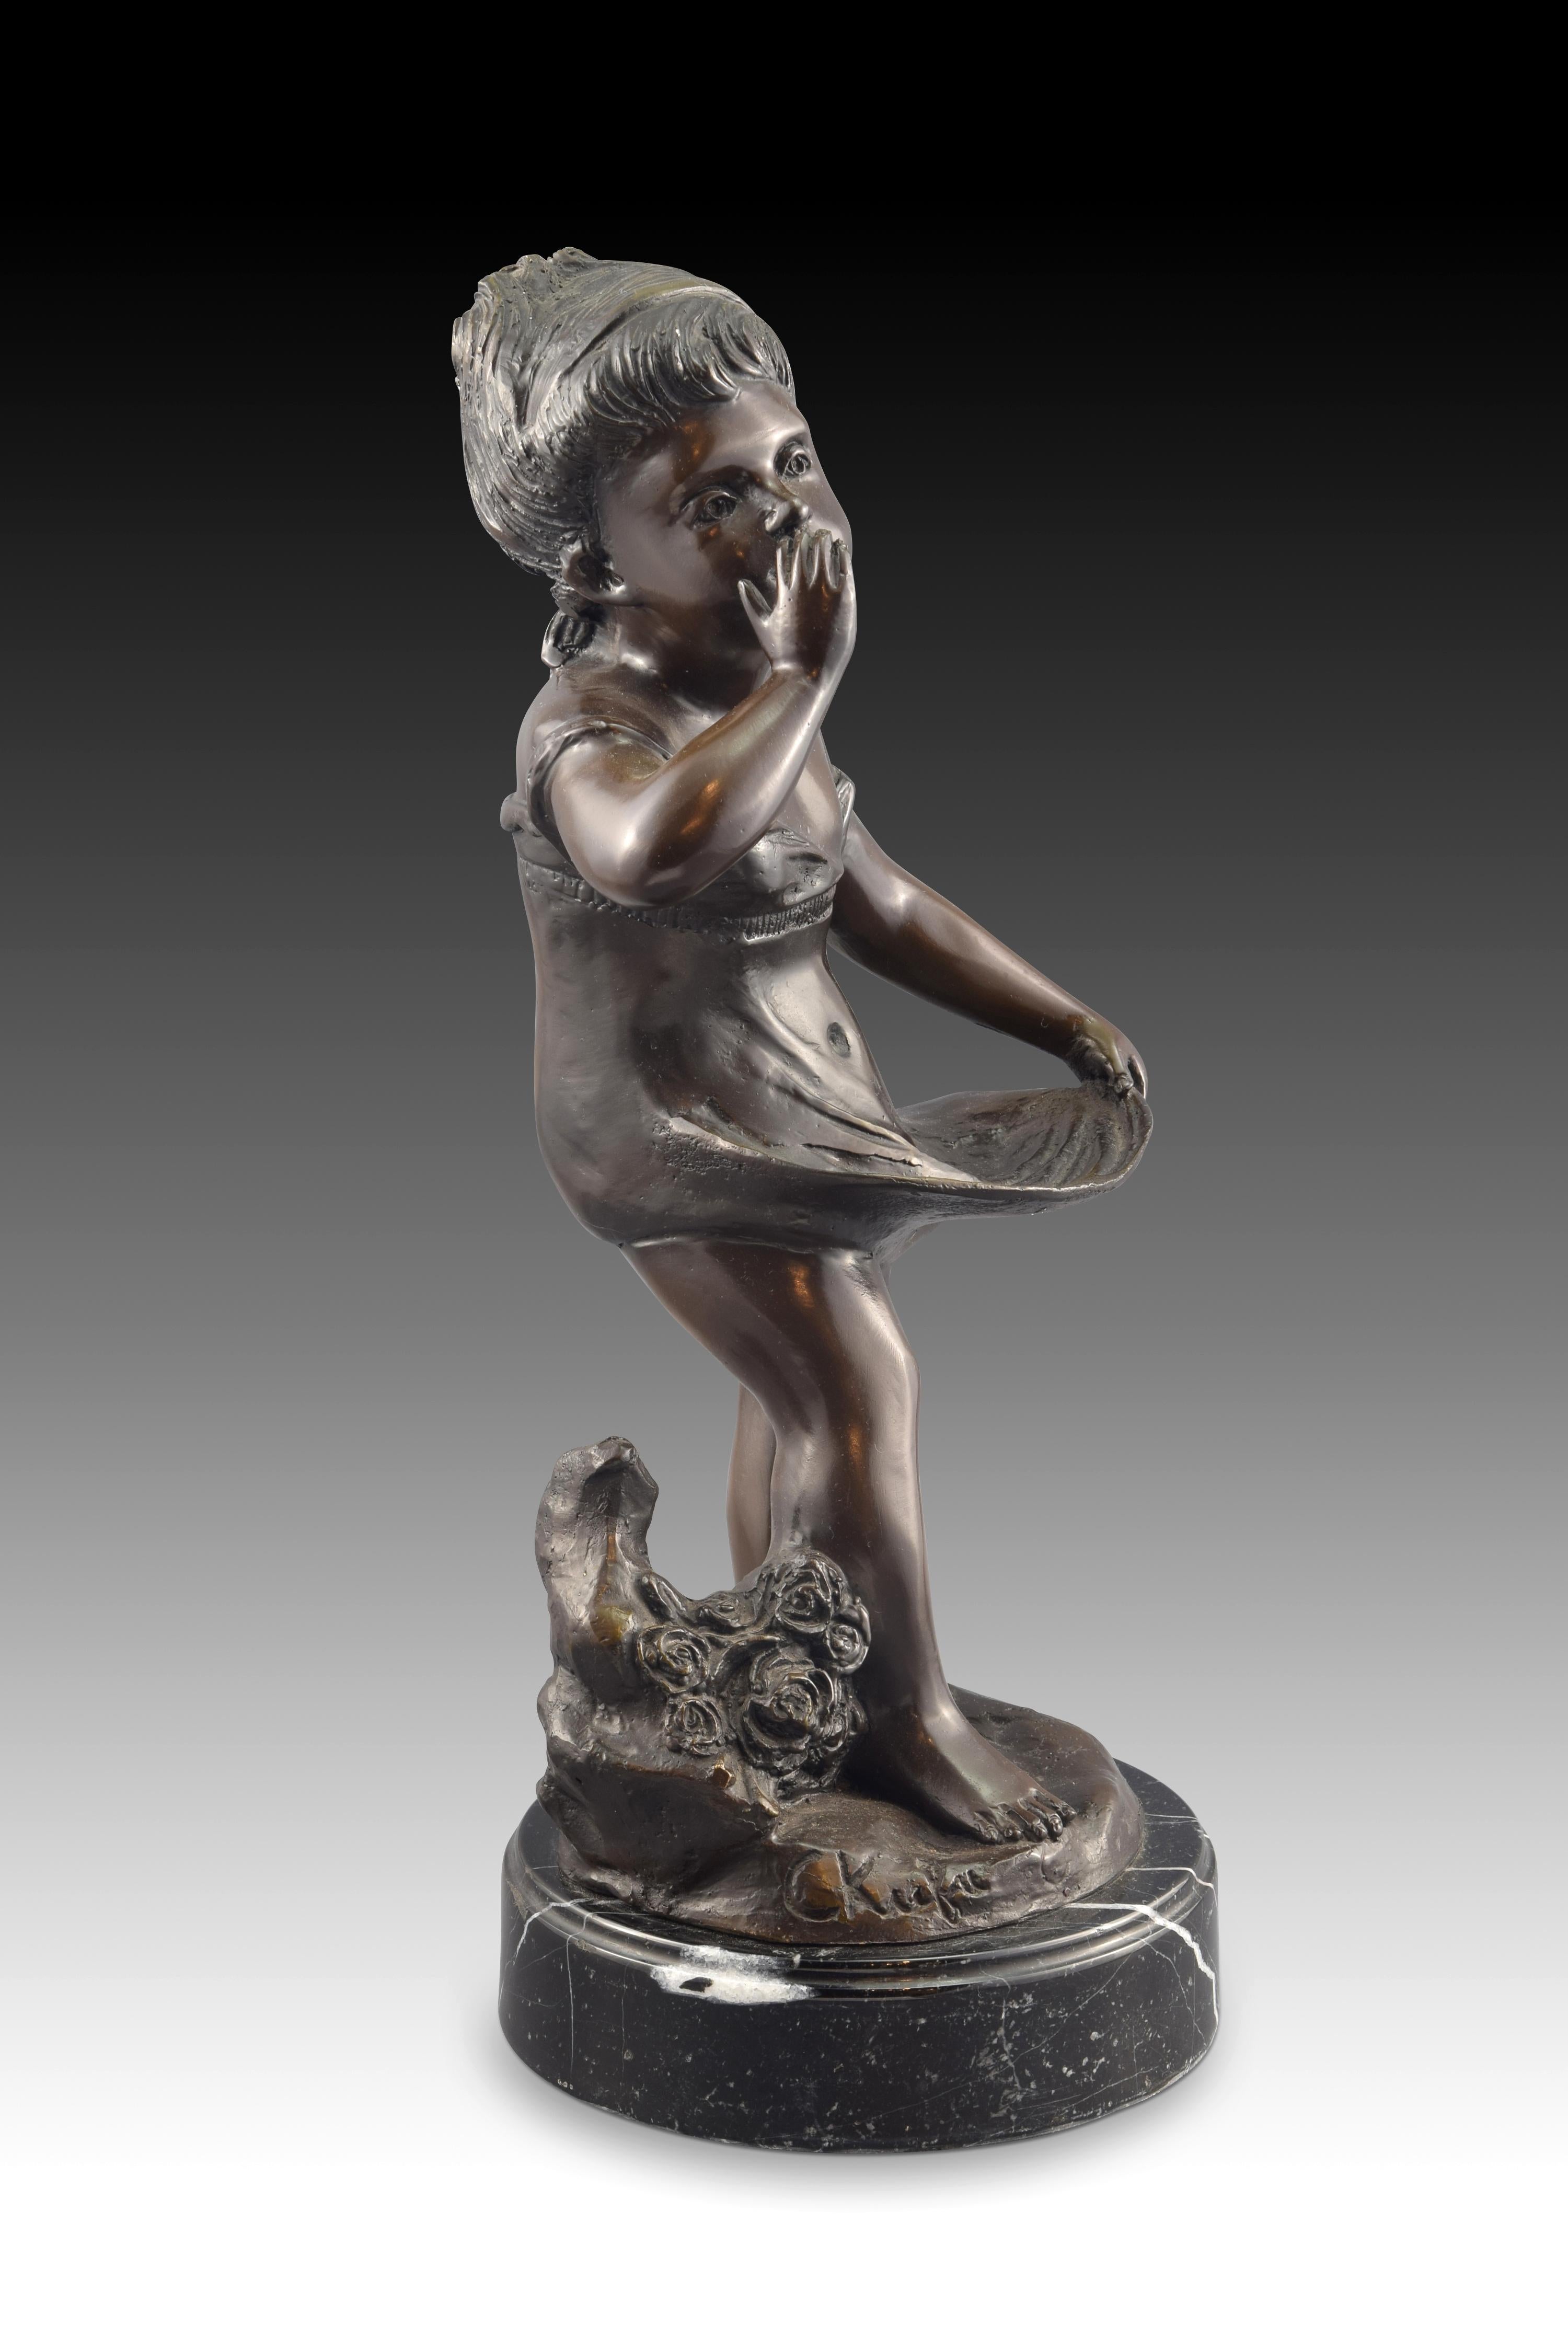 Lost wax casting. Base in marble.
The girl stands on a base that resembles land on which a stump and some roses also appear. The hand to the face and the look of concern, coupled with the gesture of extending her skirt make the viewer think that